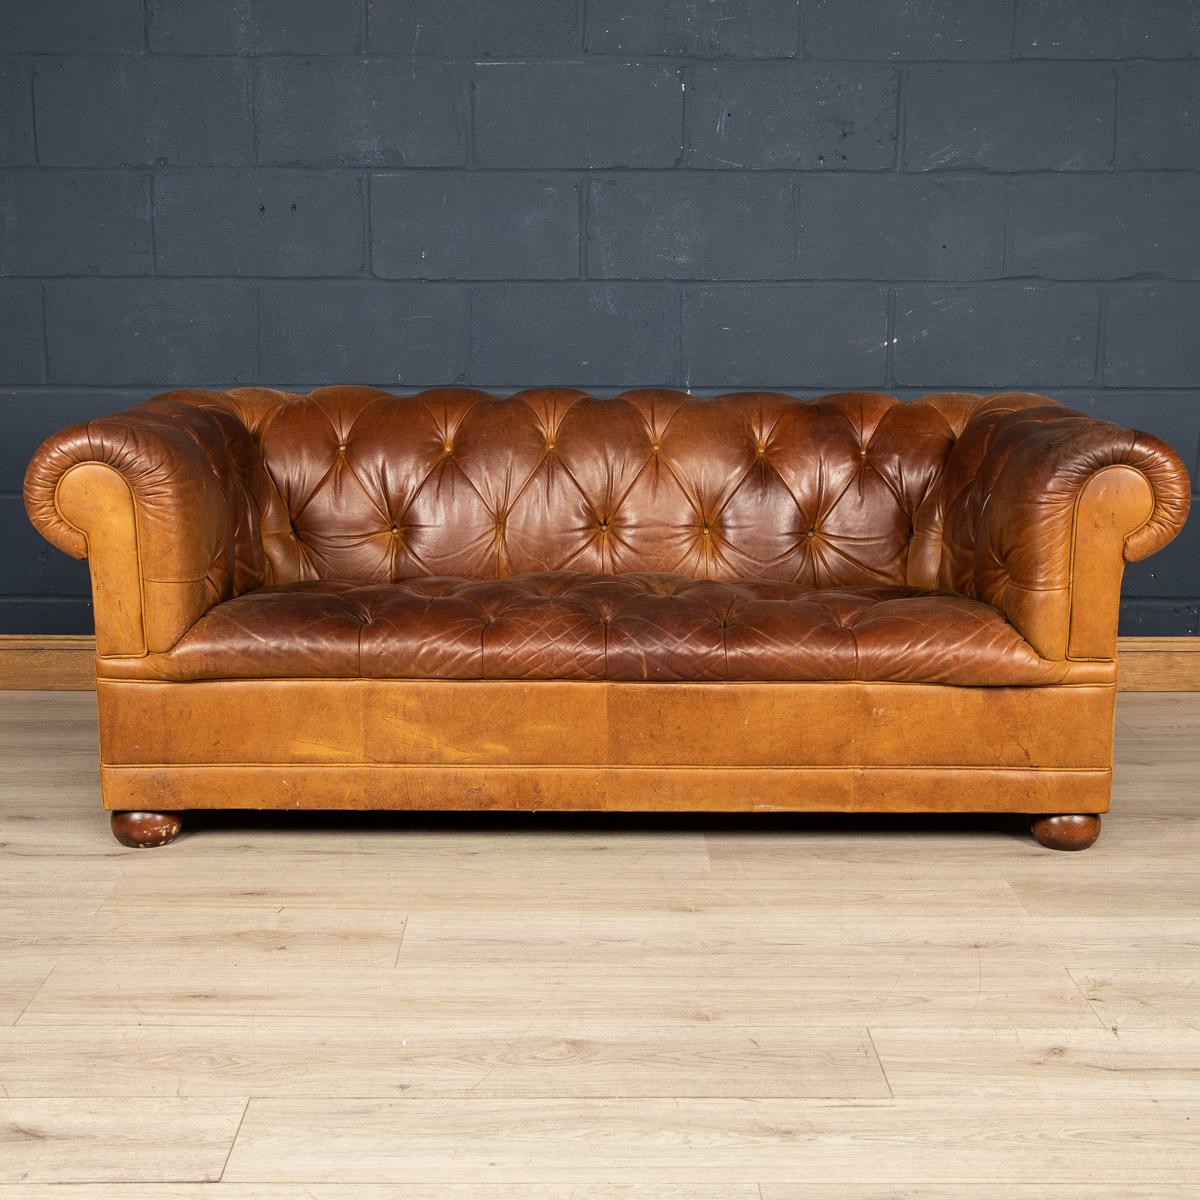 A superb leather Chesterfield sofa retailed by Laura Ashley around the latter part of the 20th century. One of the most elegant models with button down seating, this is a fashionable item of furniture capable of uplifting the interior space of any